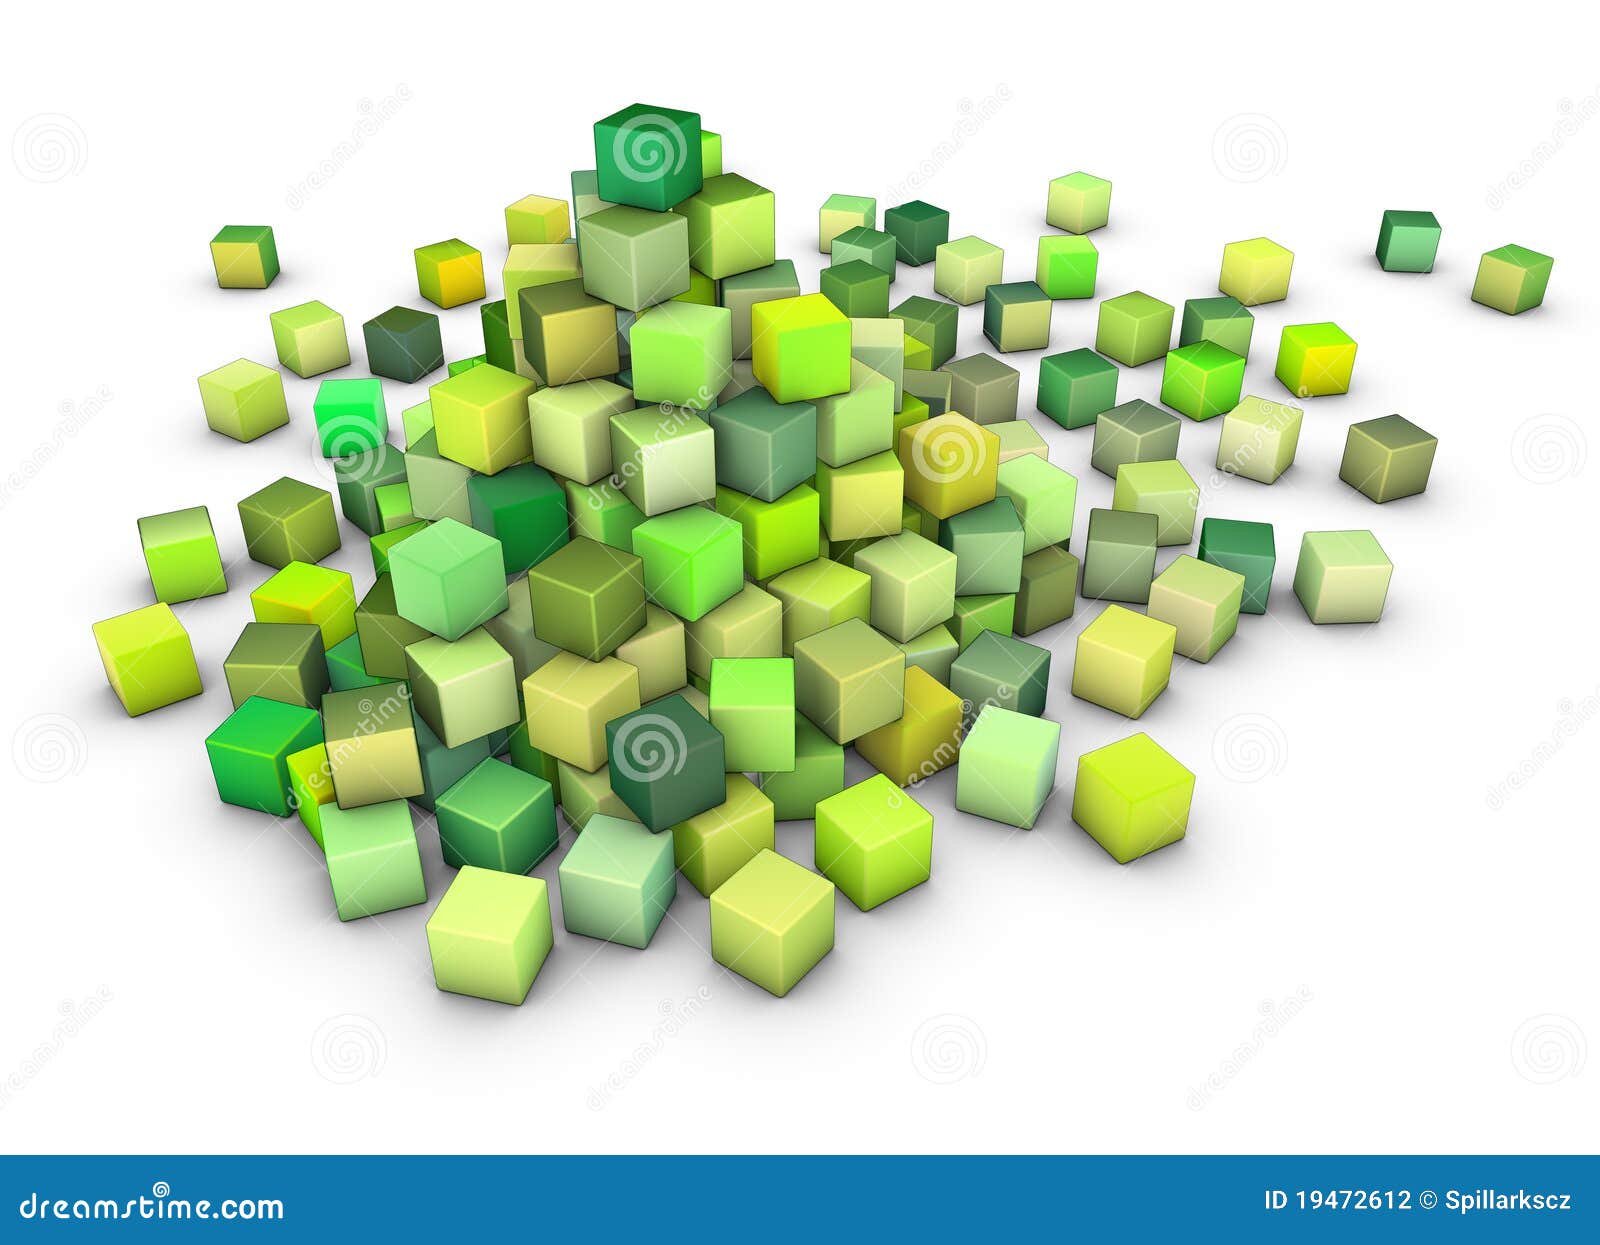 3d-large-stack-green-cubes-white-19472612.jpg